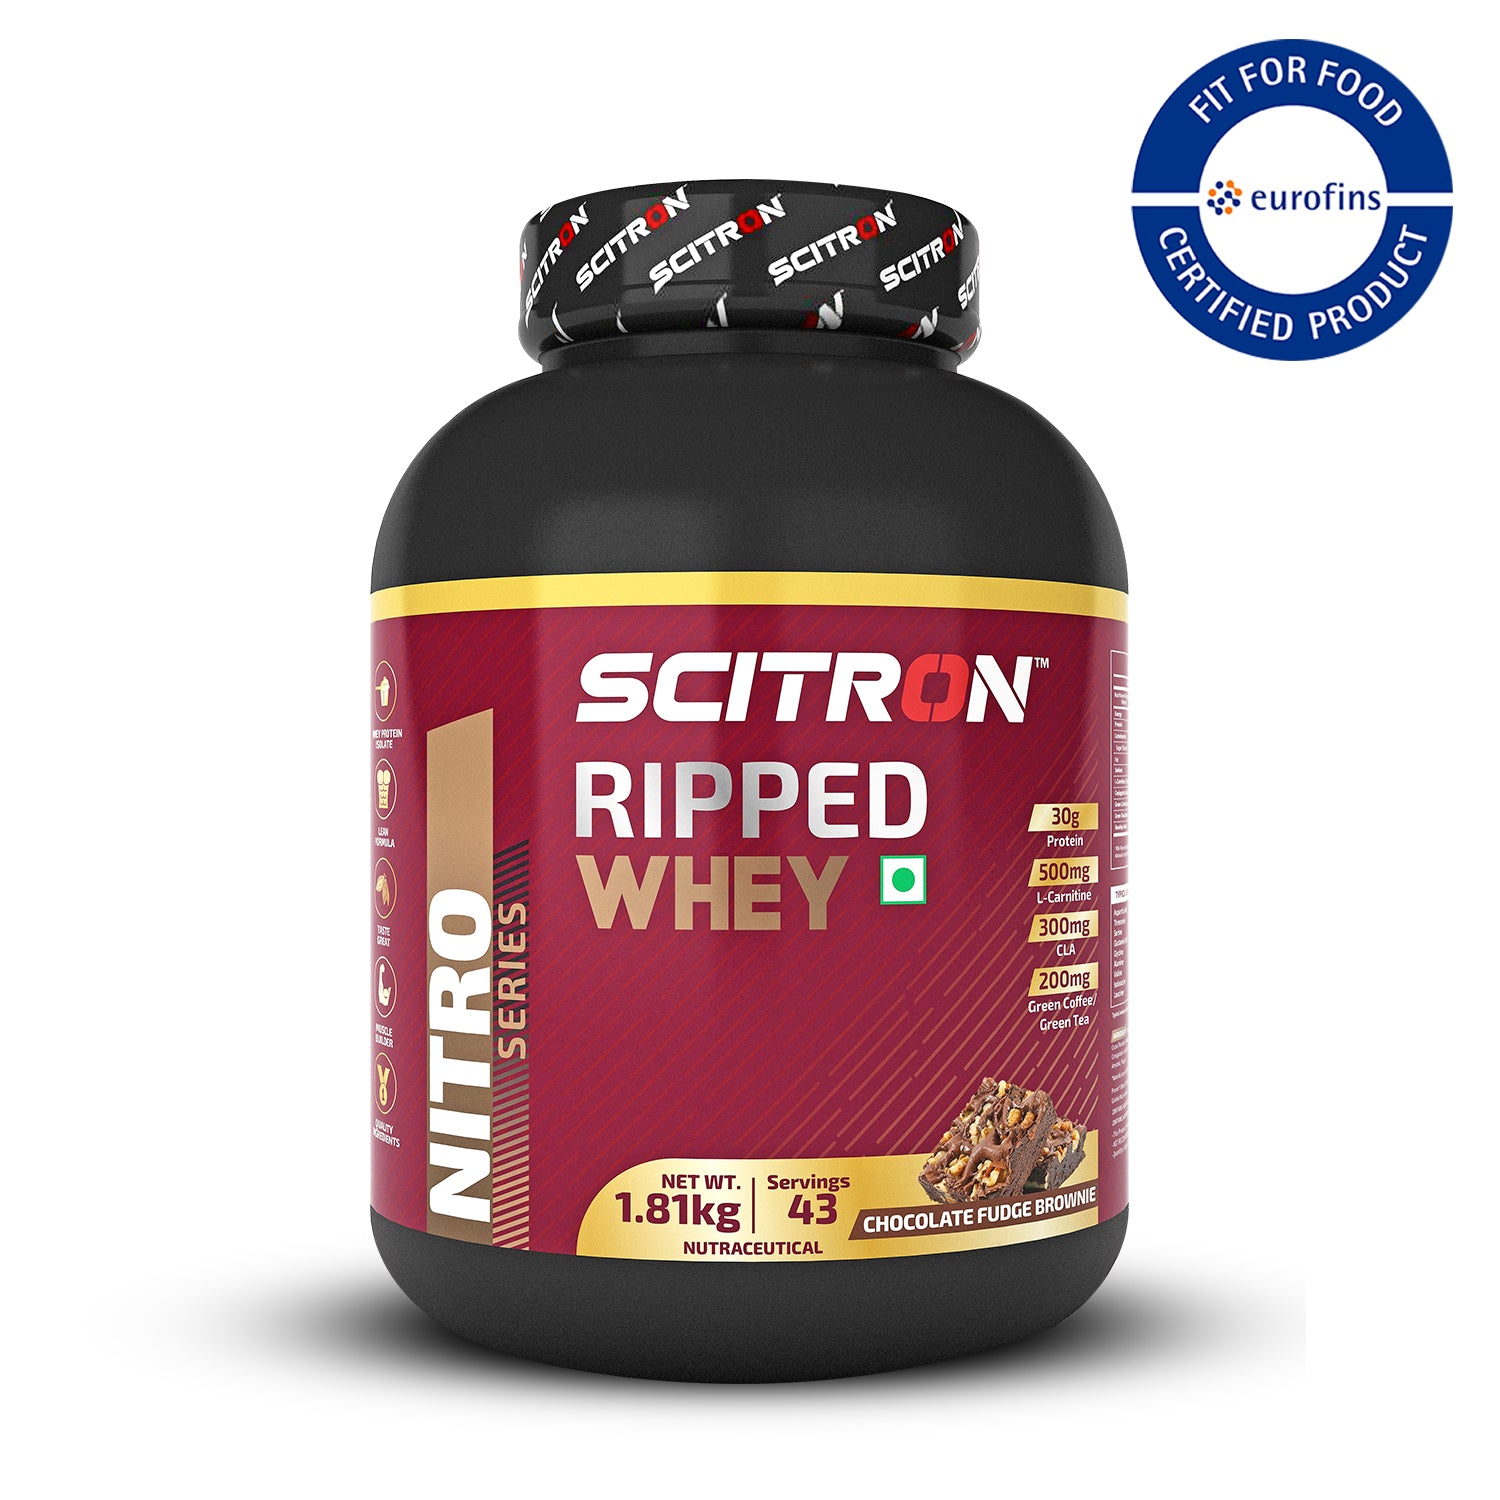 Ripped Whey Protein